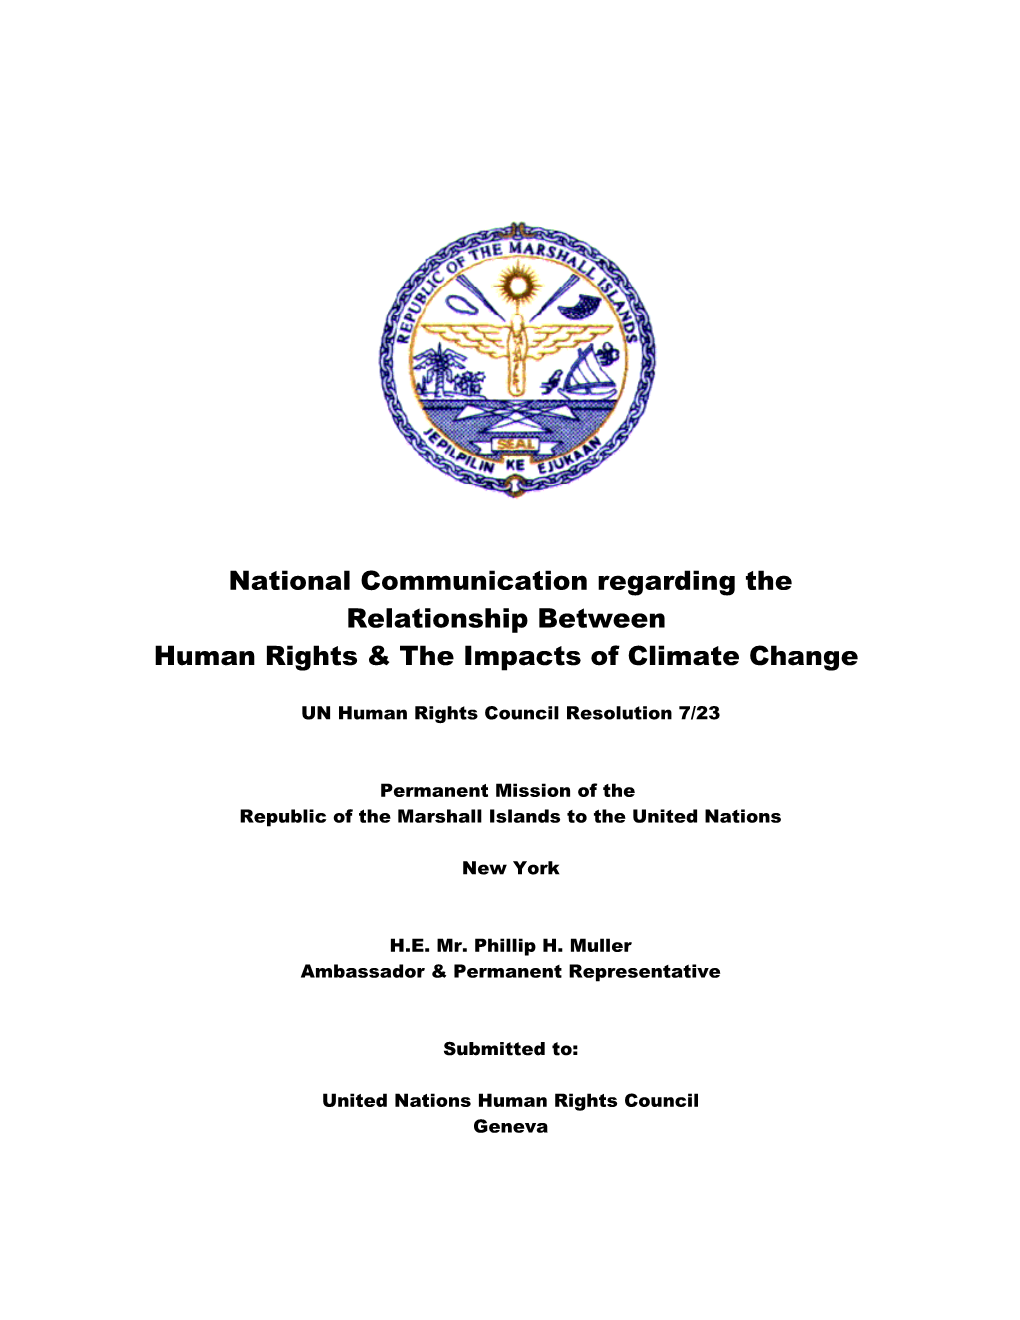 Implication of Climate Change to Human Rights